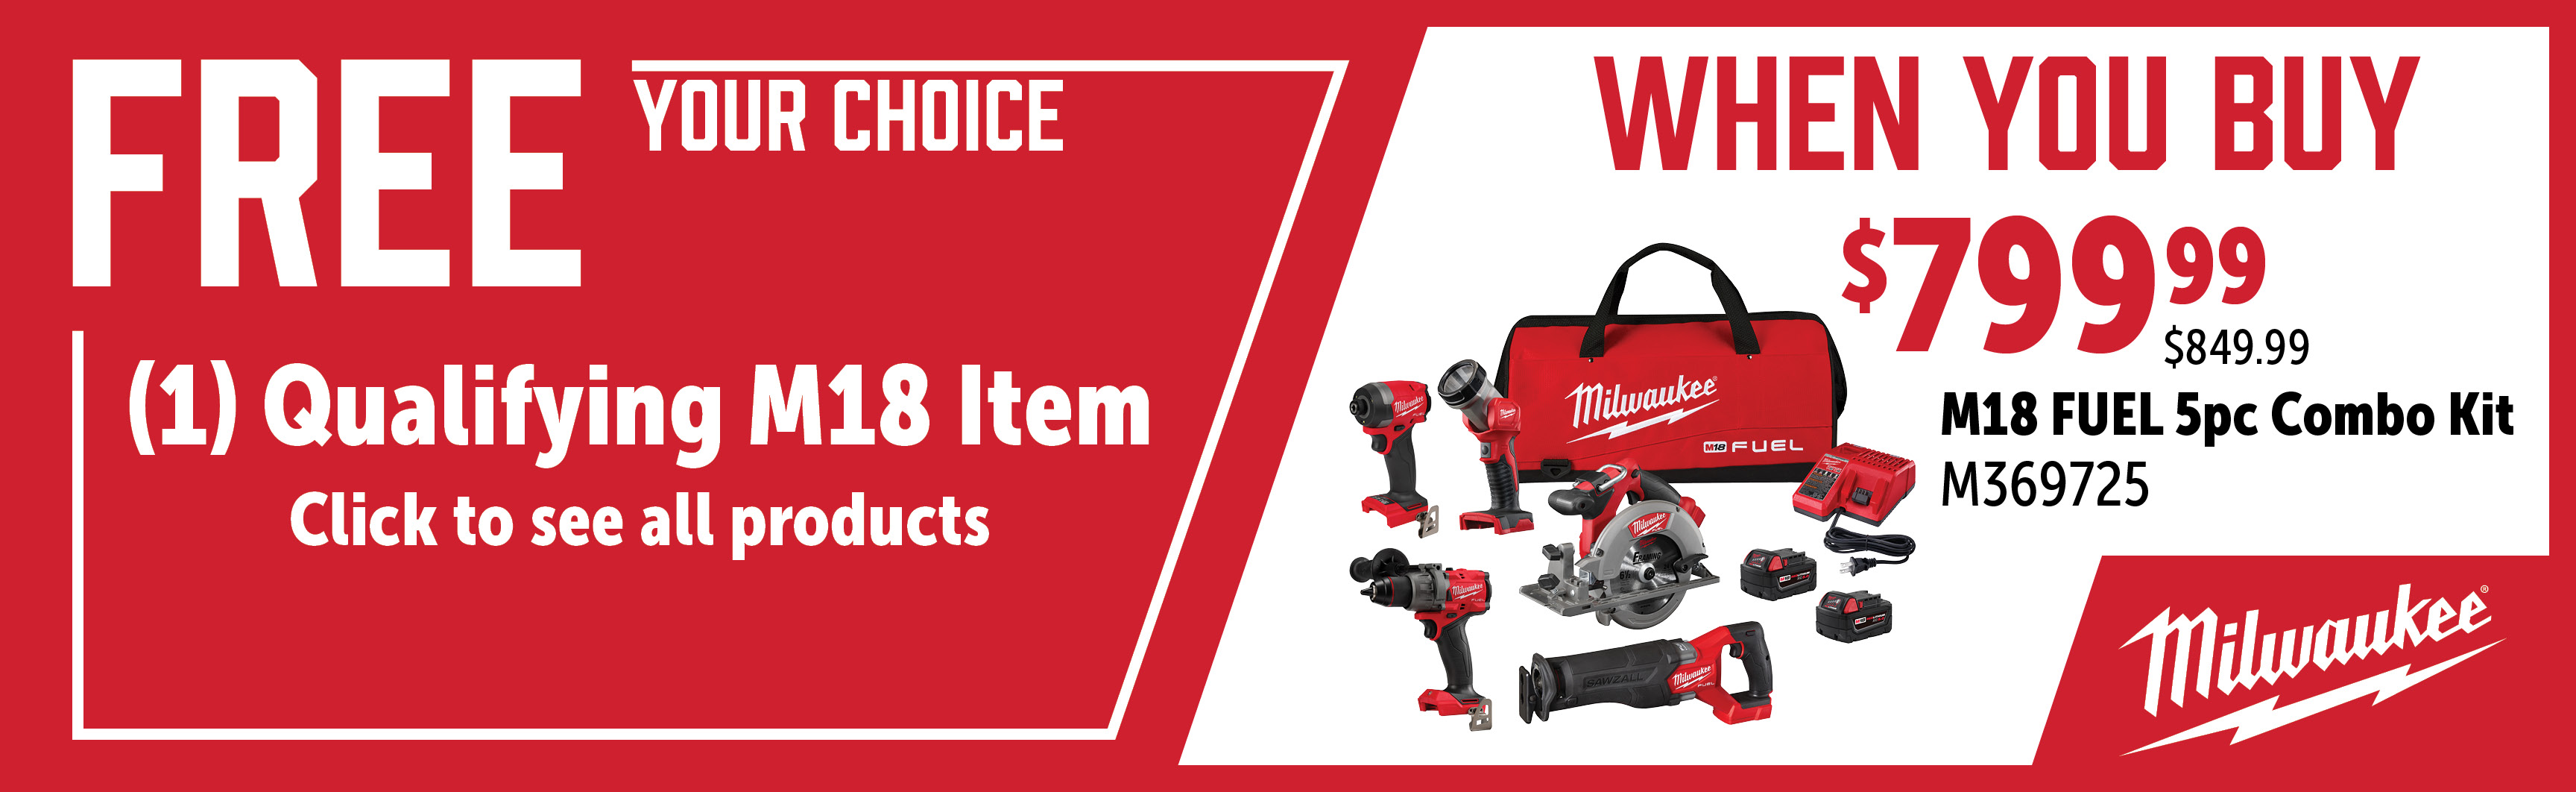 Milwaukee Feb-Apr: Buy an M369725 and Get Promo Pricing and a FREE M18 Qualifying Item